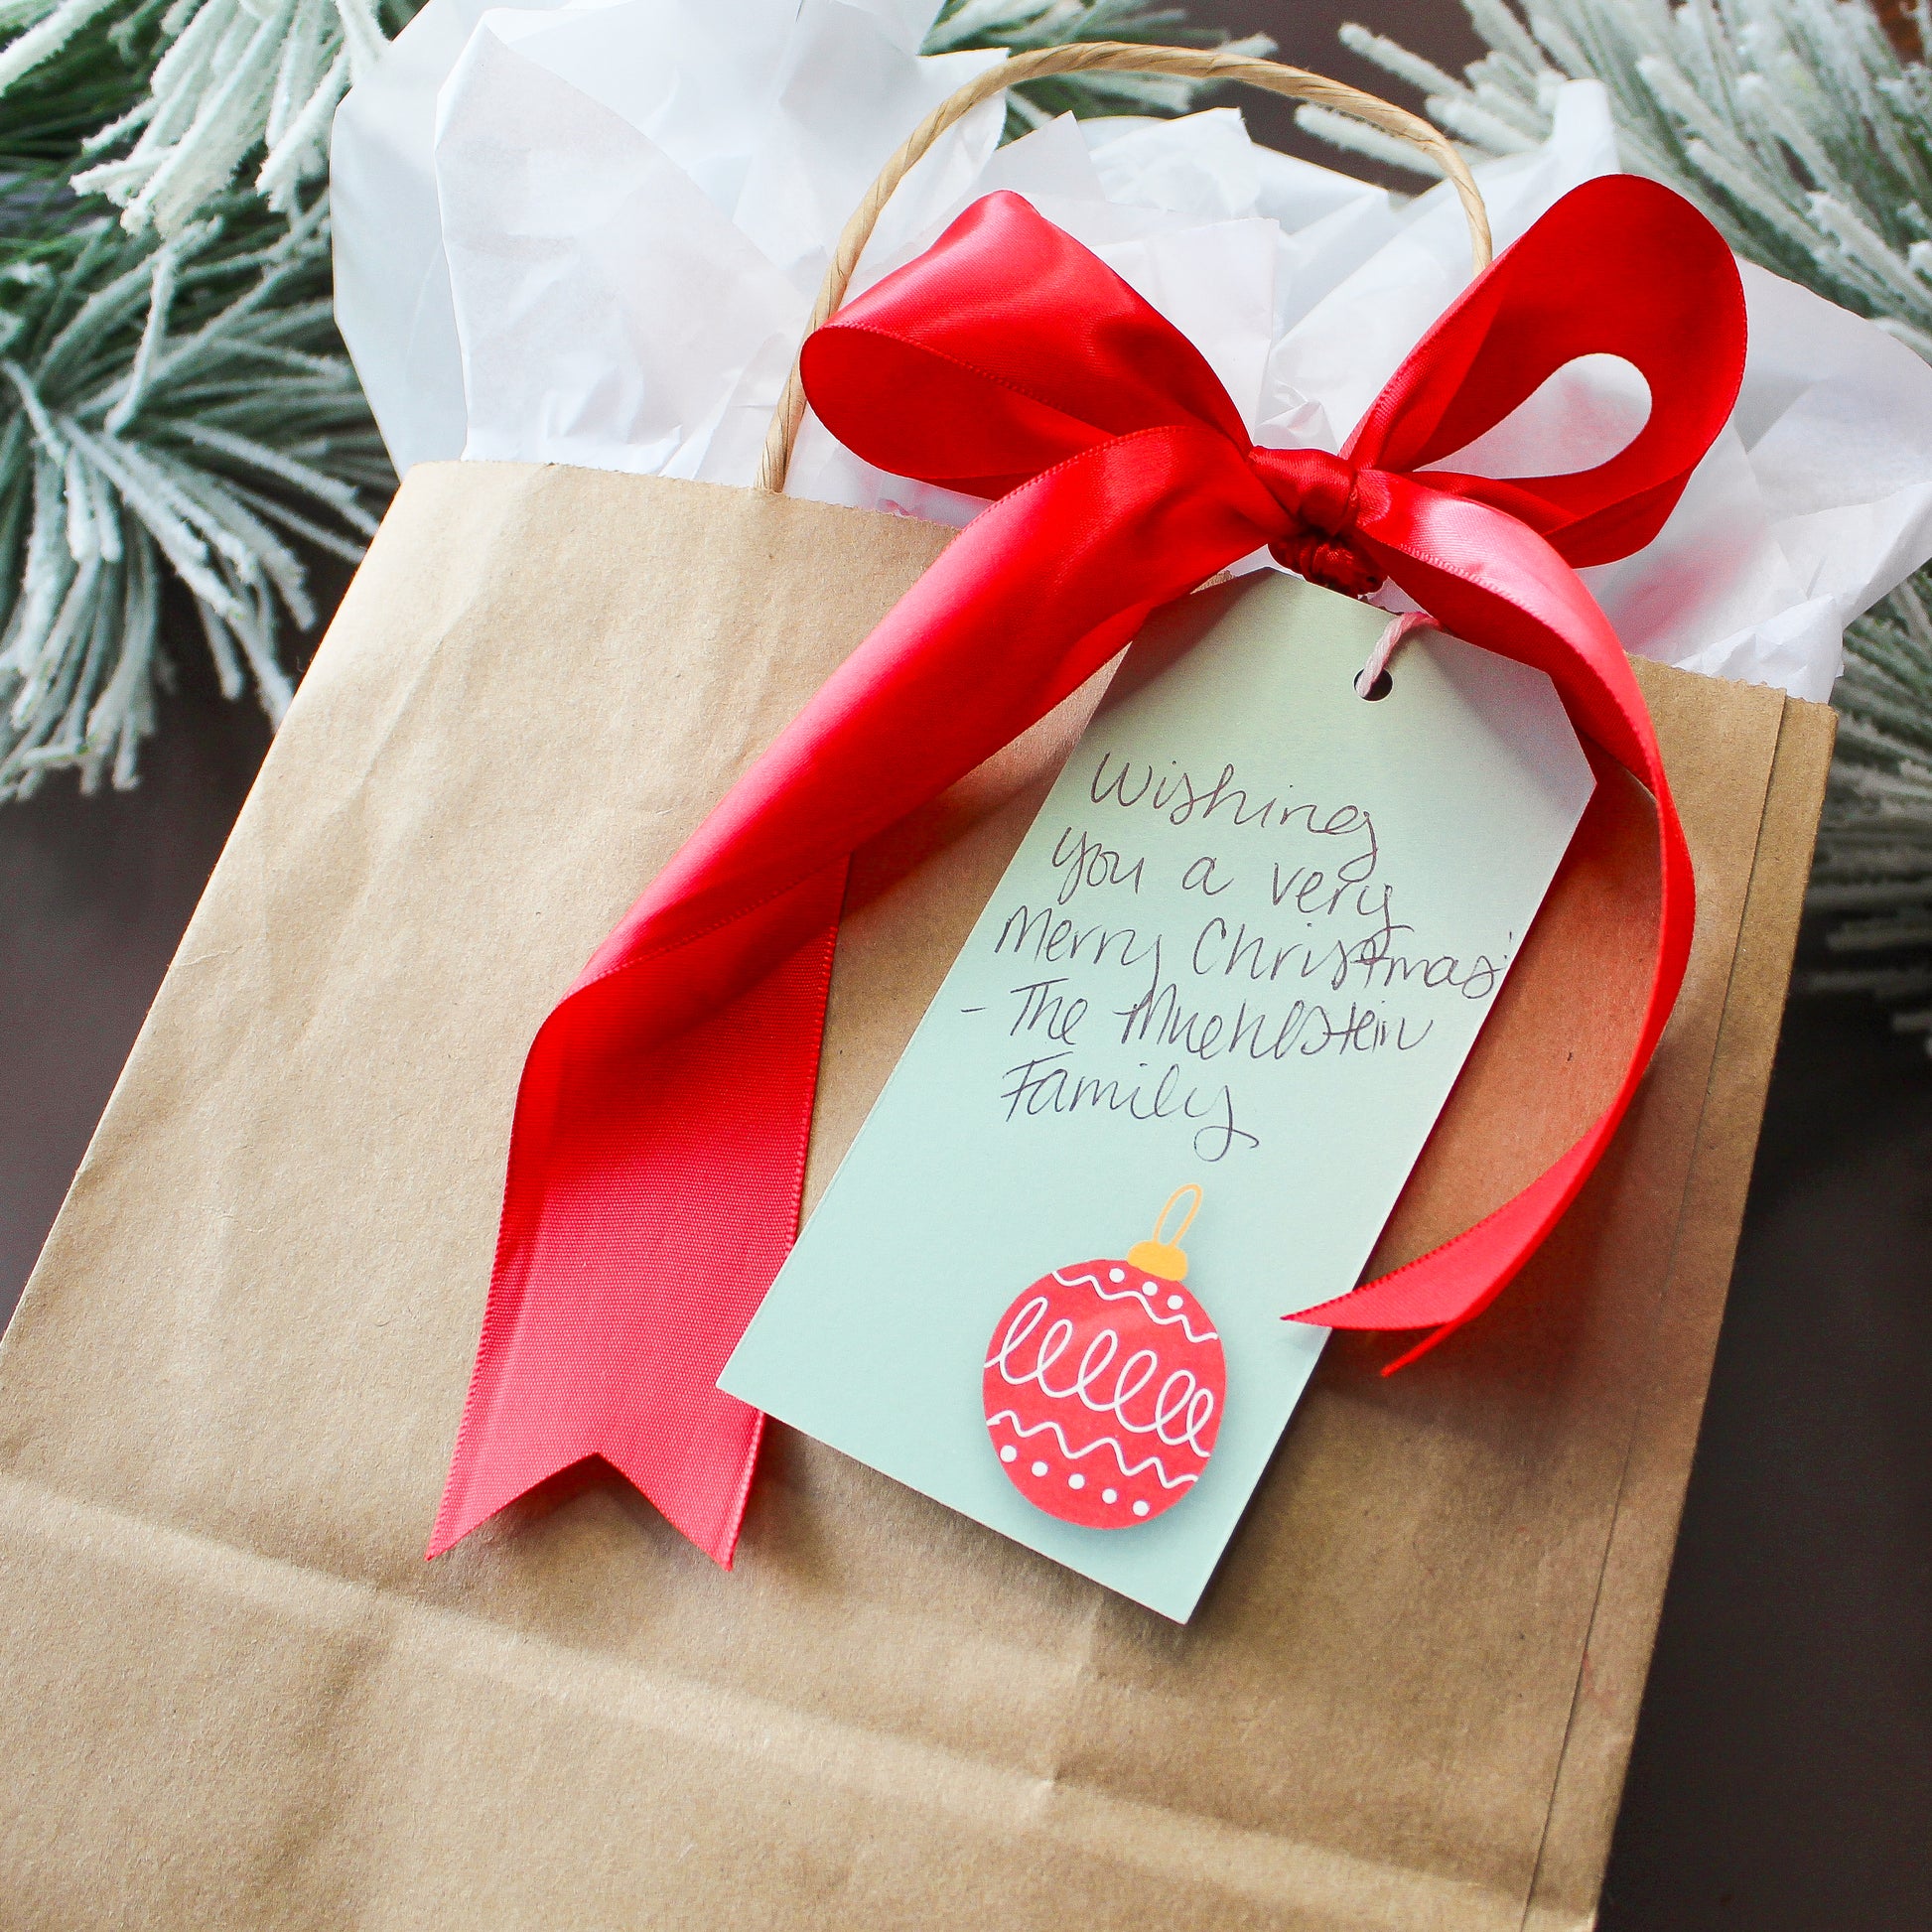 Our Red Vintage Christmas Ornament gift tags add a festive touch to your holiday presents. These cute tags come in sets of eight and include pre-cut string. 